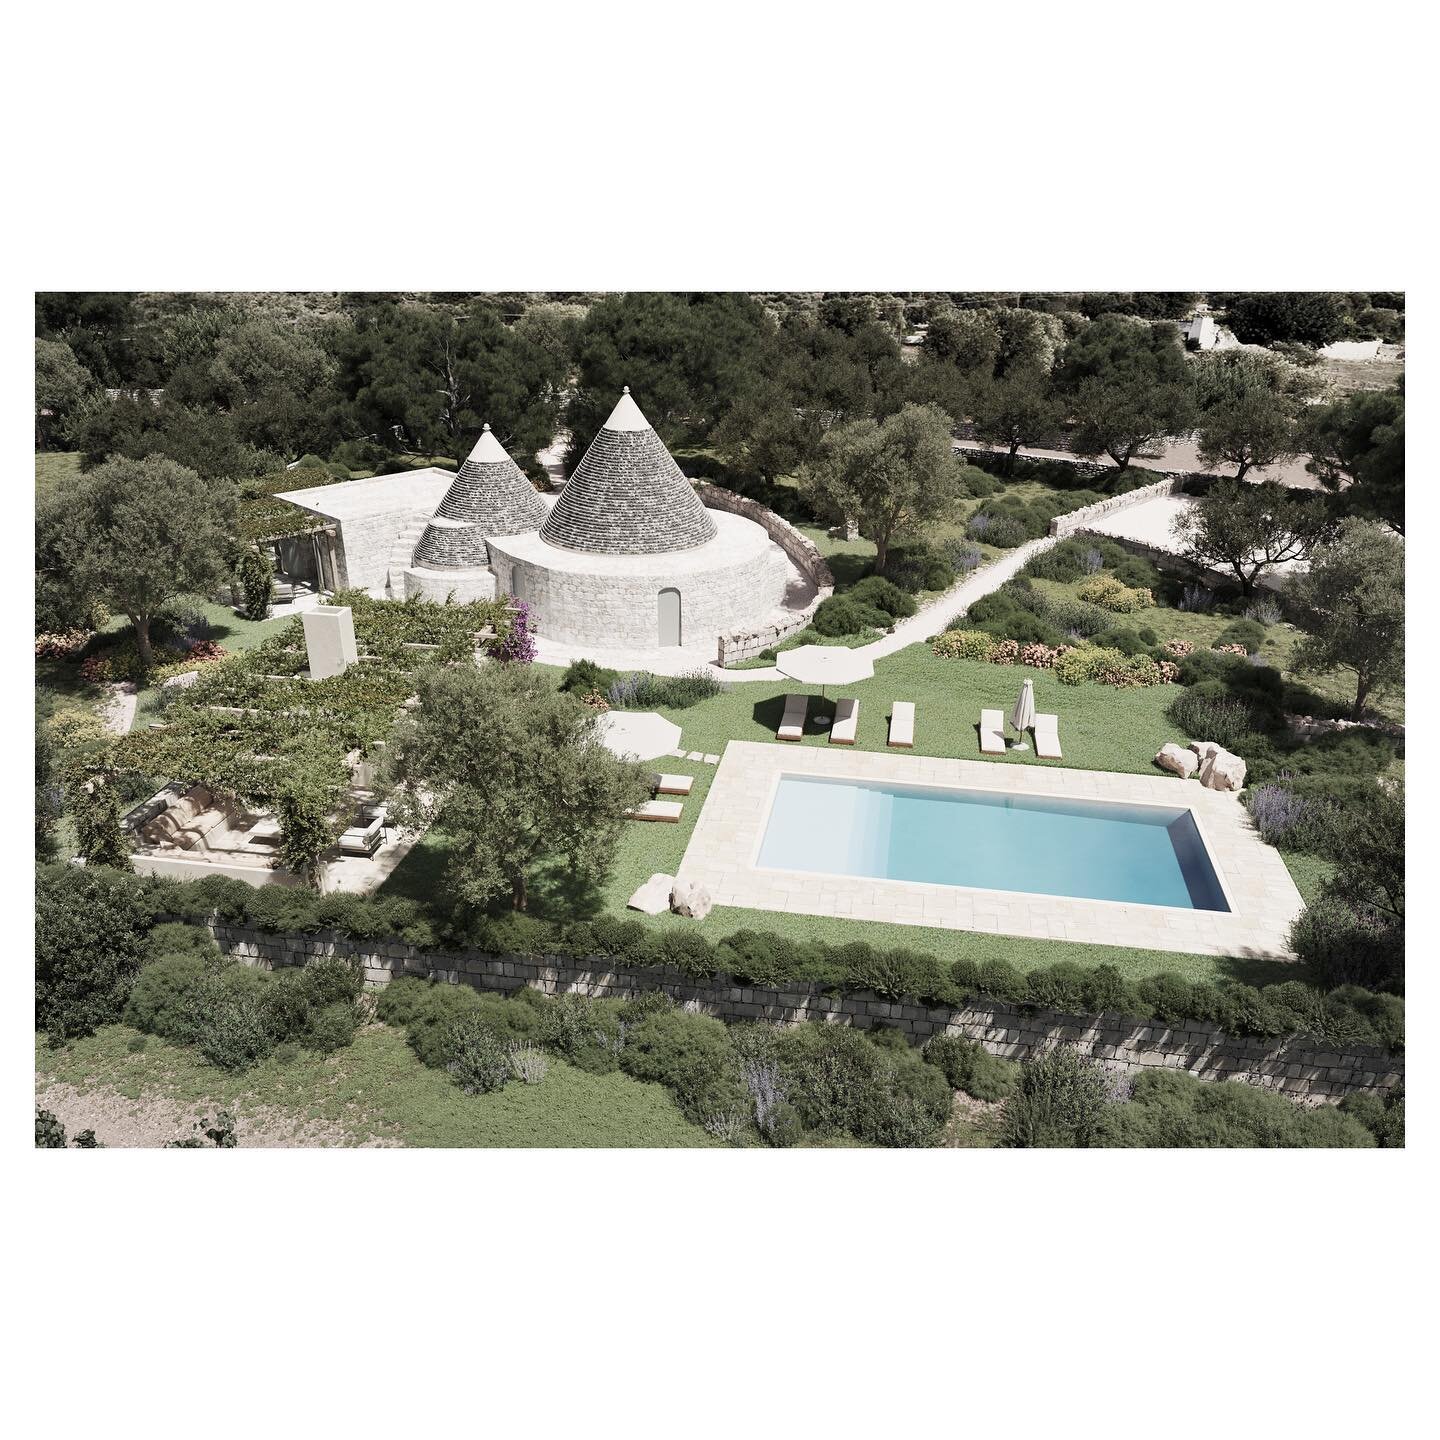 Take a look at these brand new properties in Puglia from @welcomebeyond - Trullo Petrarolo and Masseria del Vigneto 💚
⠀⠀⠀⠀⠀⠀⠀⠀⠀ 
Welcoming their first guests in the coming weeks. One is a two bedroom restored Trullo in a valley of its own alongside 